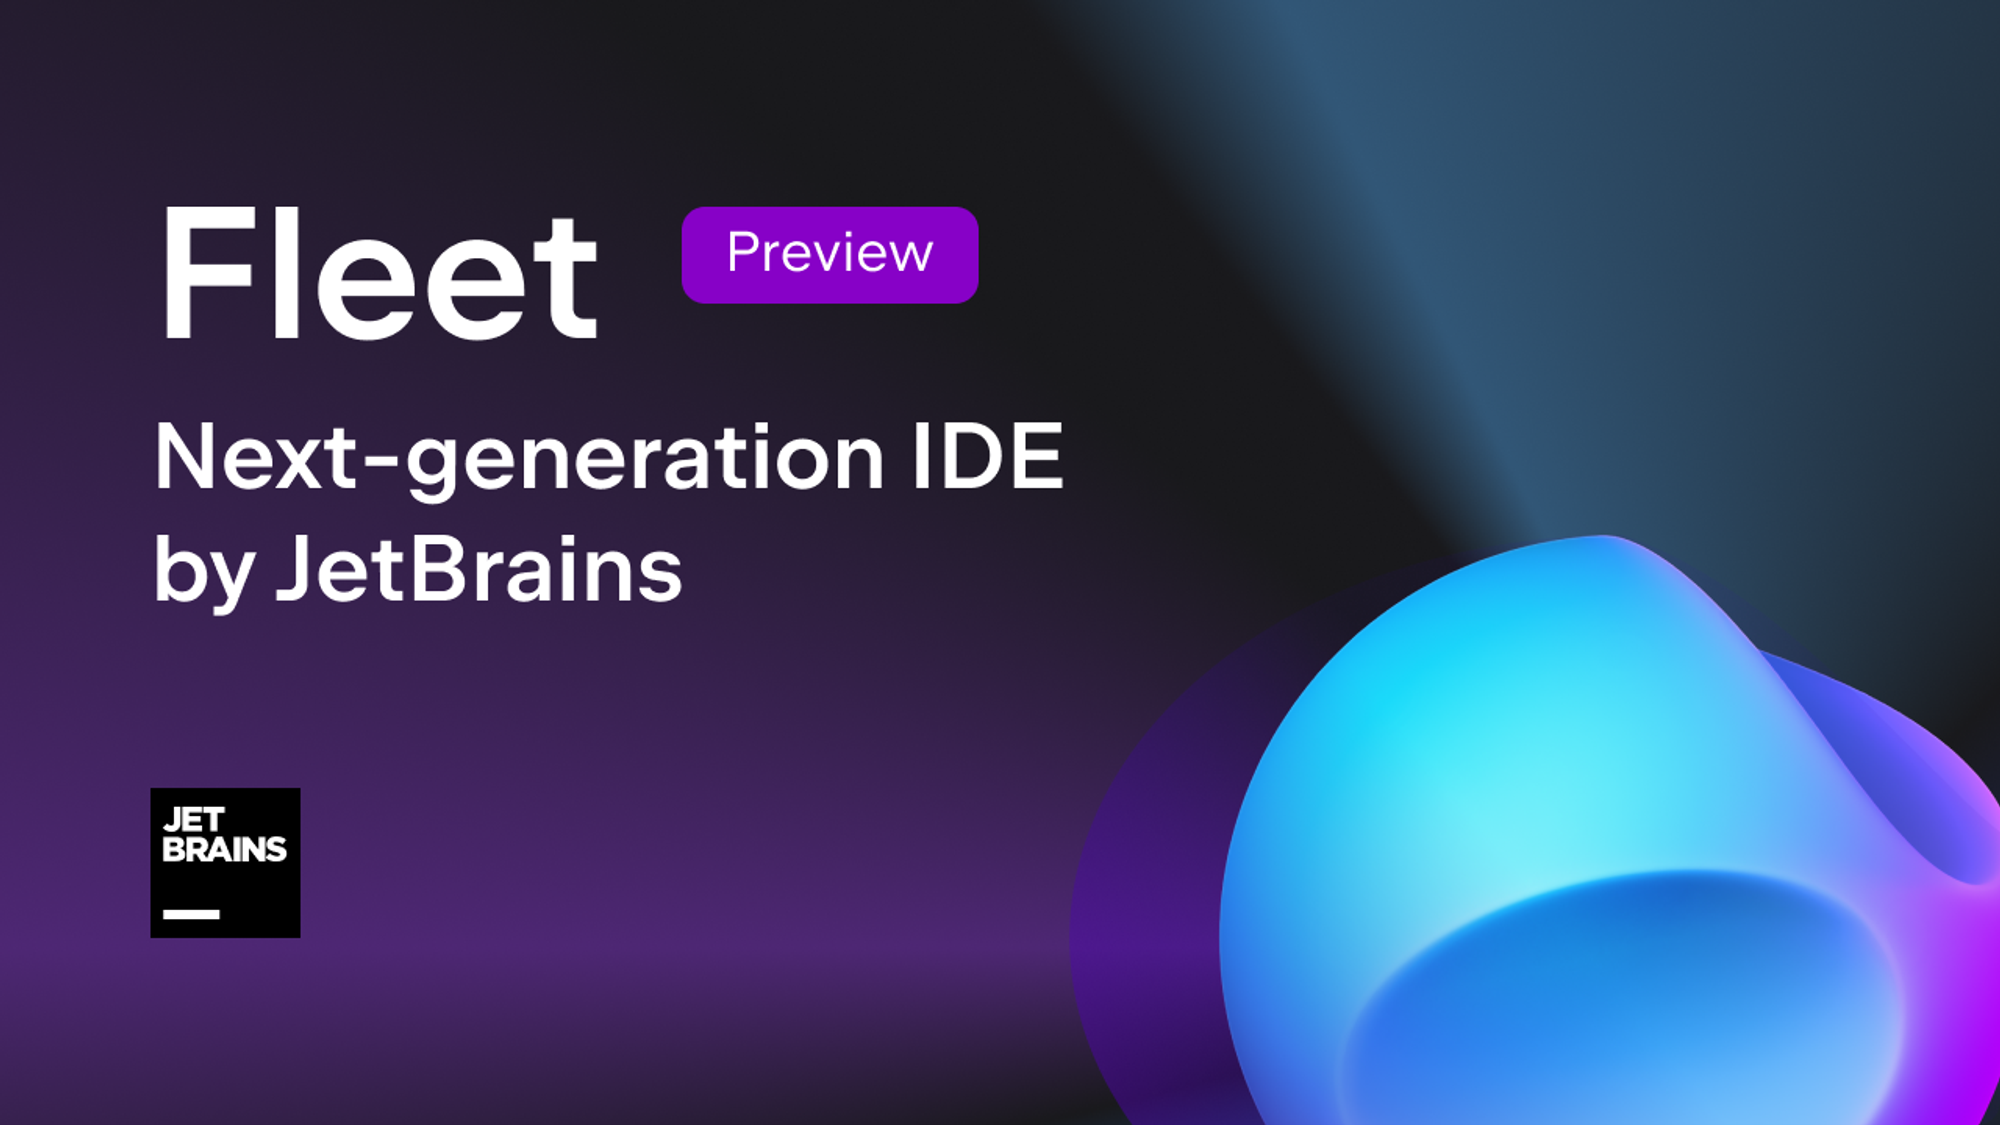 Fleet 1.15 Is Here: Git Integration Improvements, Quick Evaluation of Expressions, Bundled Tailwind Support, Formatting the File on Save, and More. | The JetBrains Fleet Blog